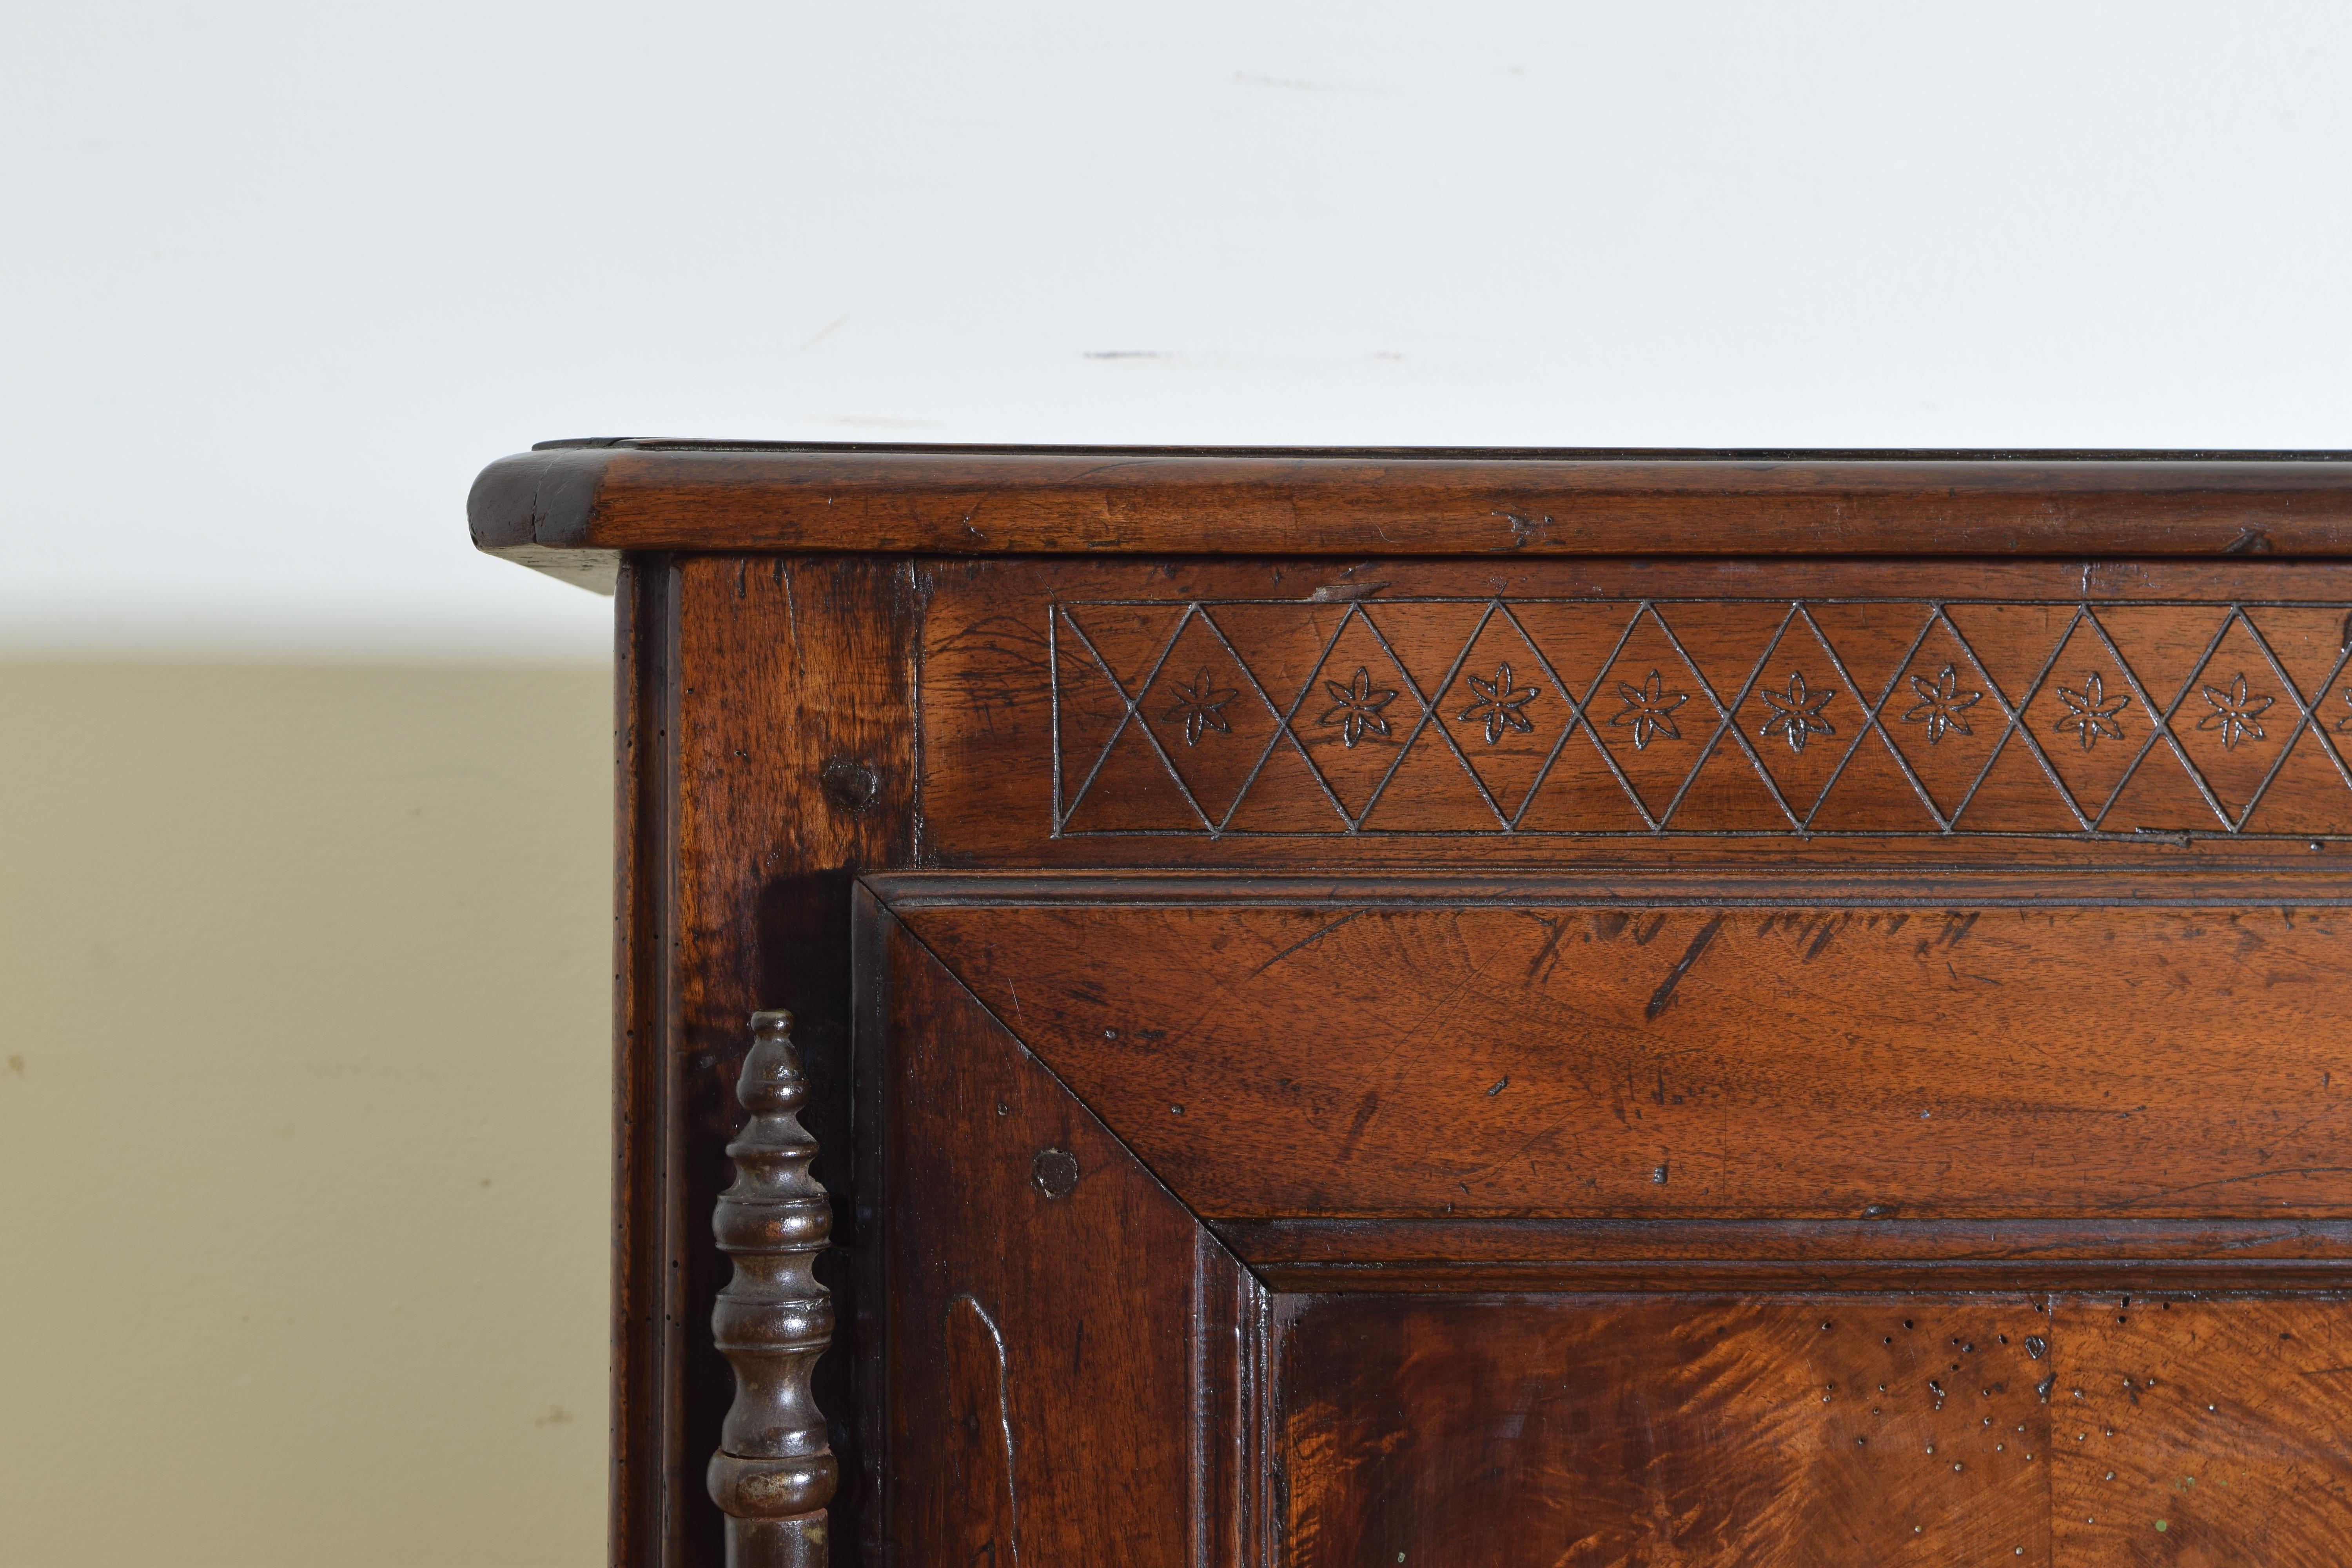 Late 18th Century French Louis XV/XVI Carved Walnut Buffet, Third Quarter of the 18th Century